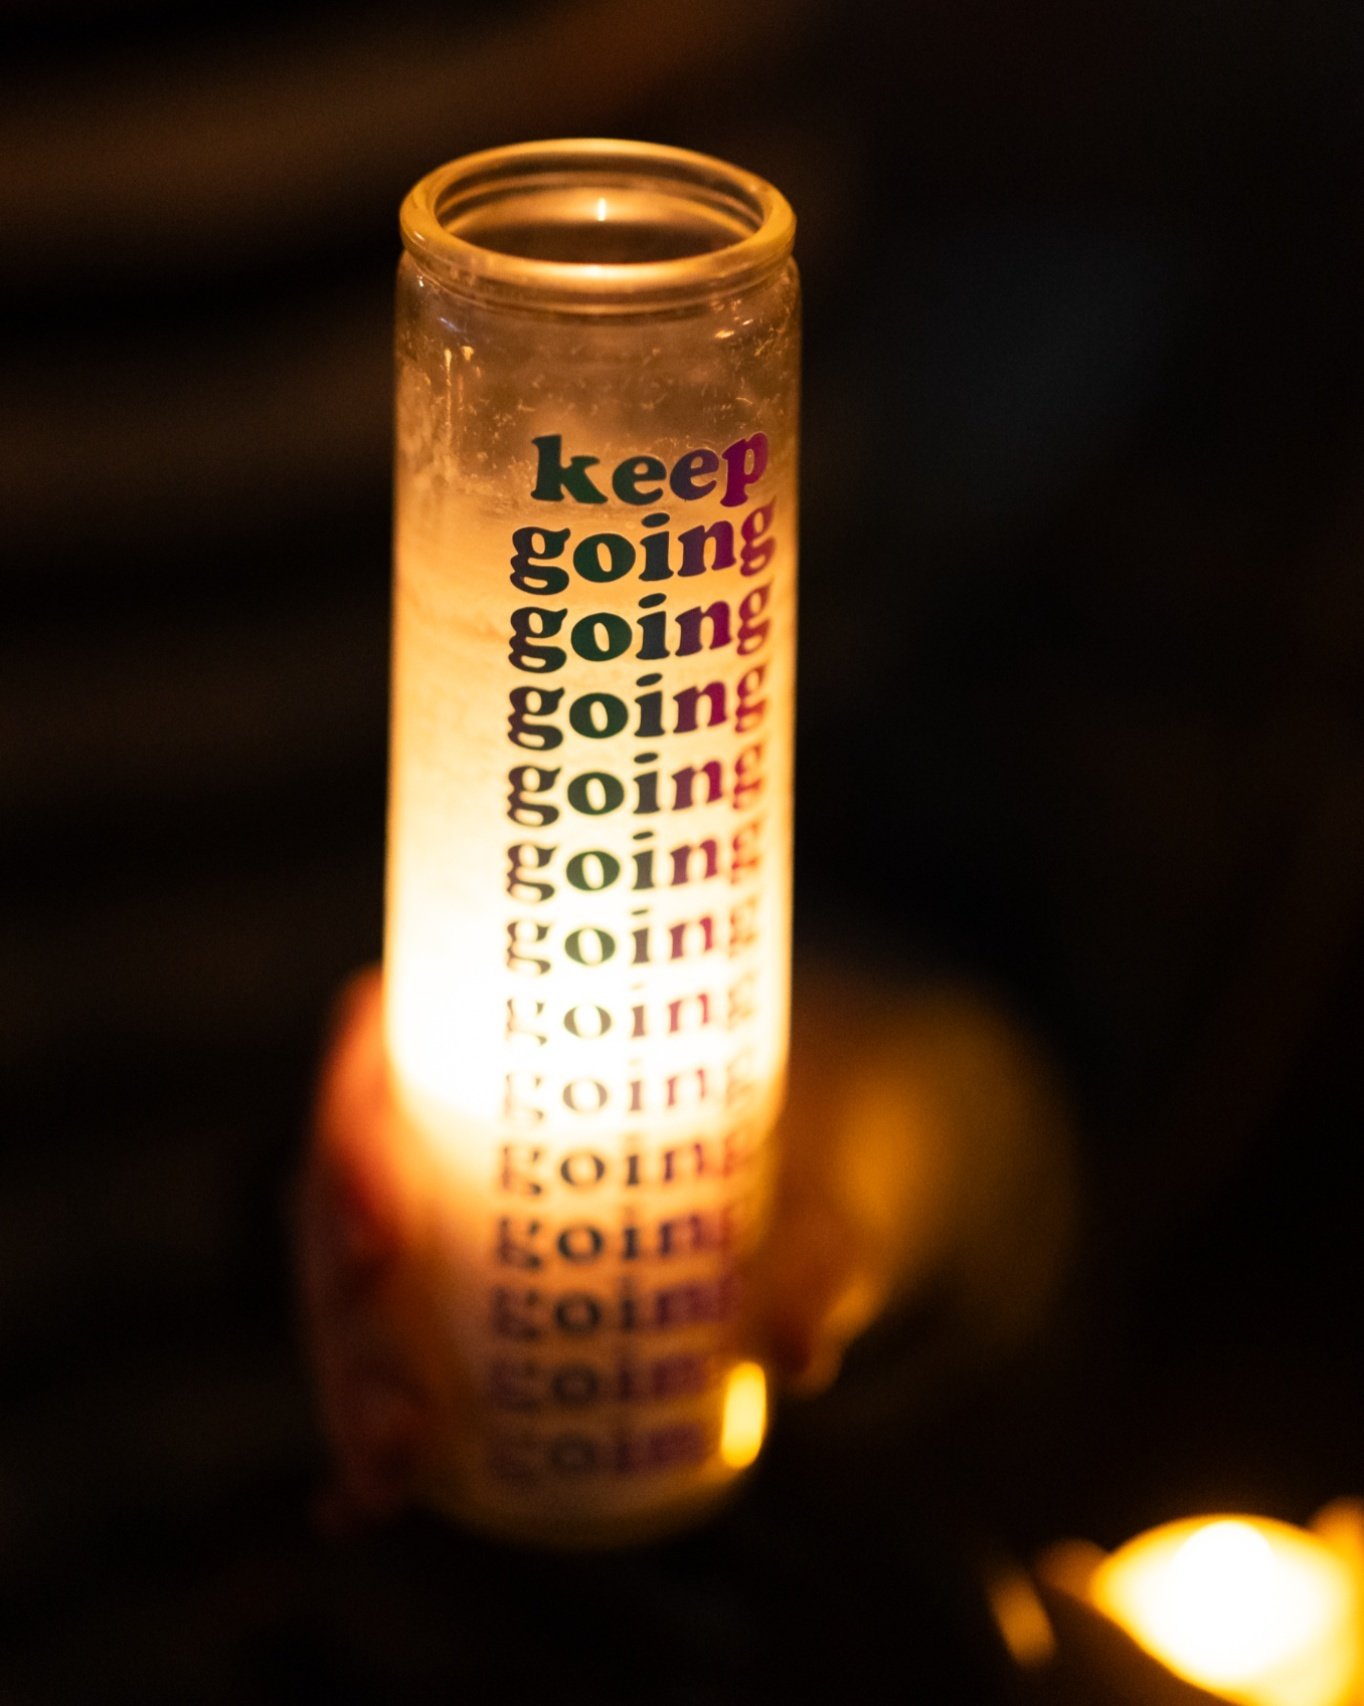 It has been three months, but Nex, we're still carrying your light. 

Photo by Lauren Smith at an Oklahoma City vigil for Nex Benedict. 

ID: photo of a lit cylindrical candle with text &quot;Keep going&quot; with the word going repeating several tim